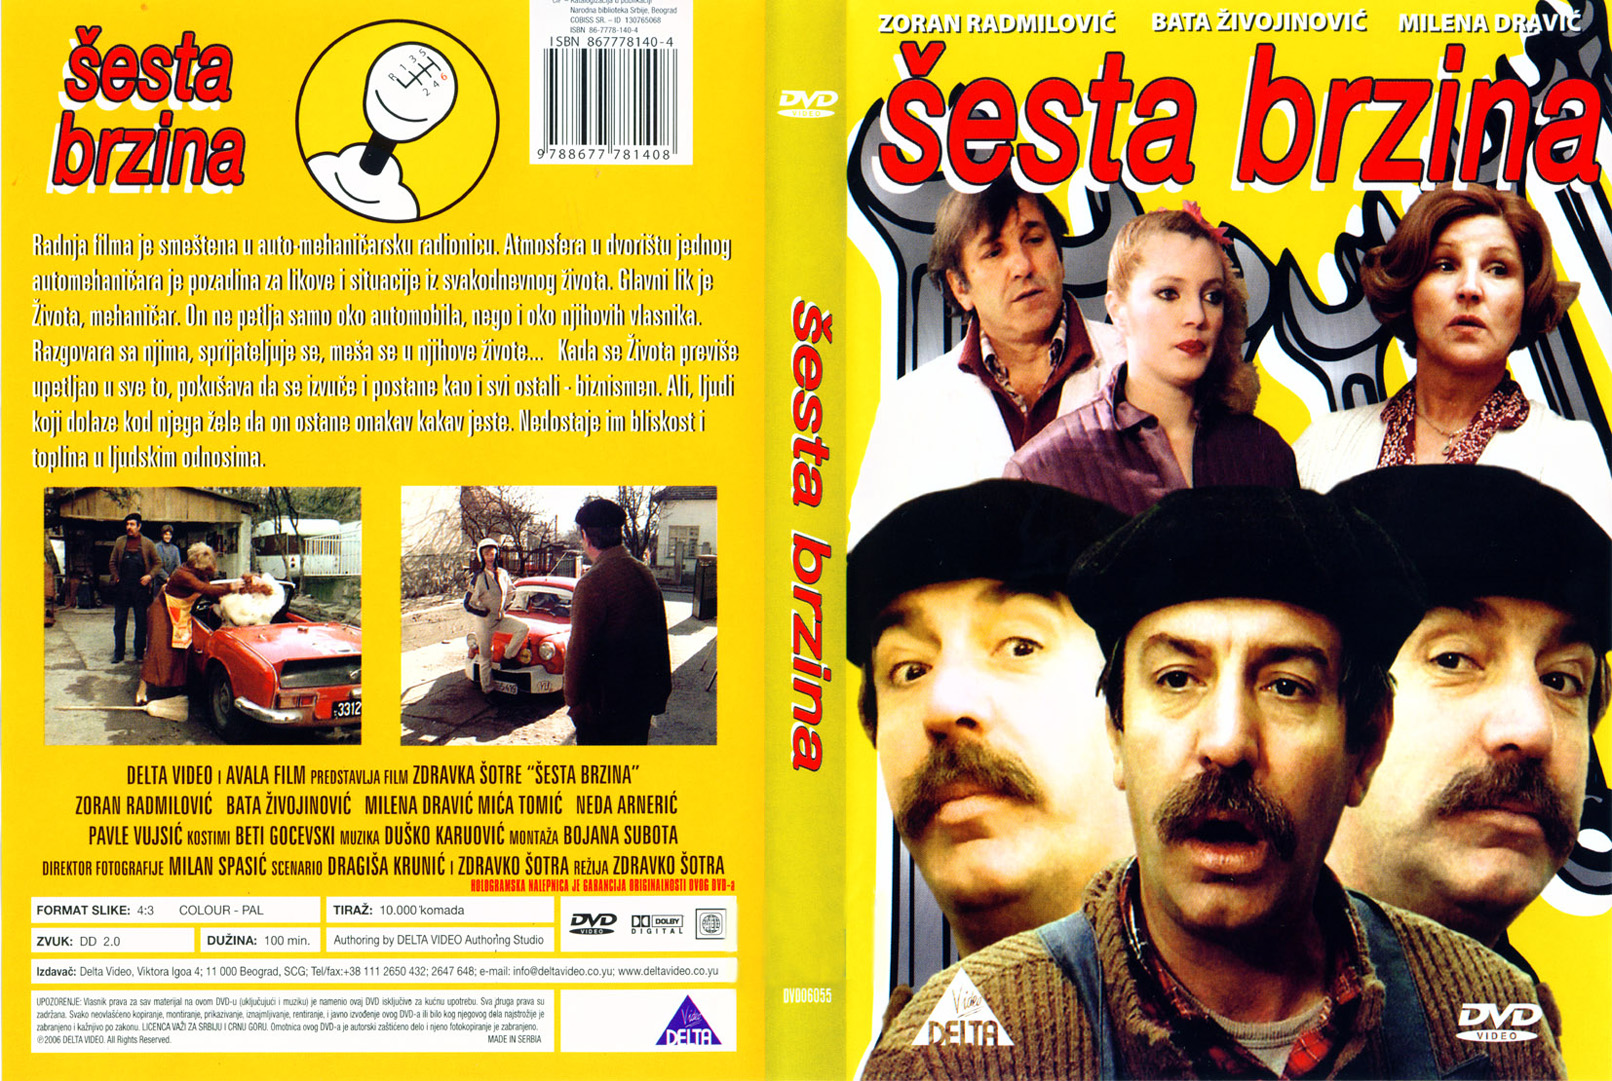 Click to view full size image -  DVD Cover - S - sesta brzina original dvd - sesta brzina original dvd.jpg